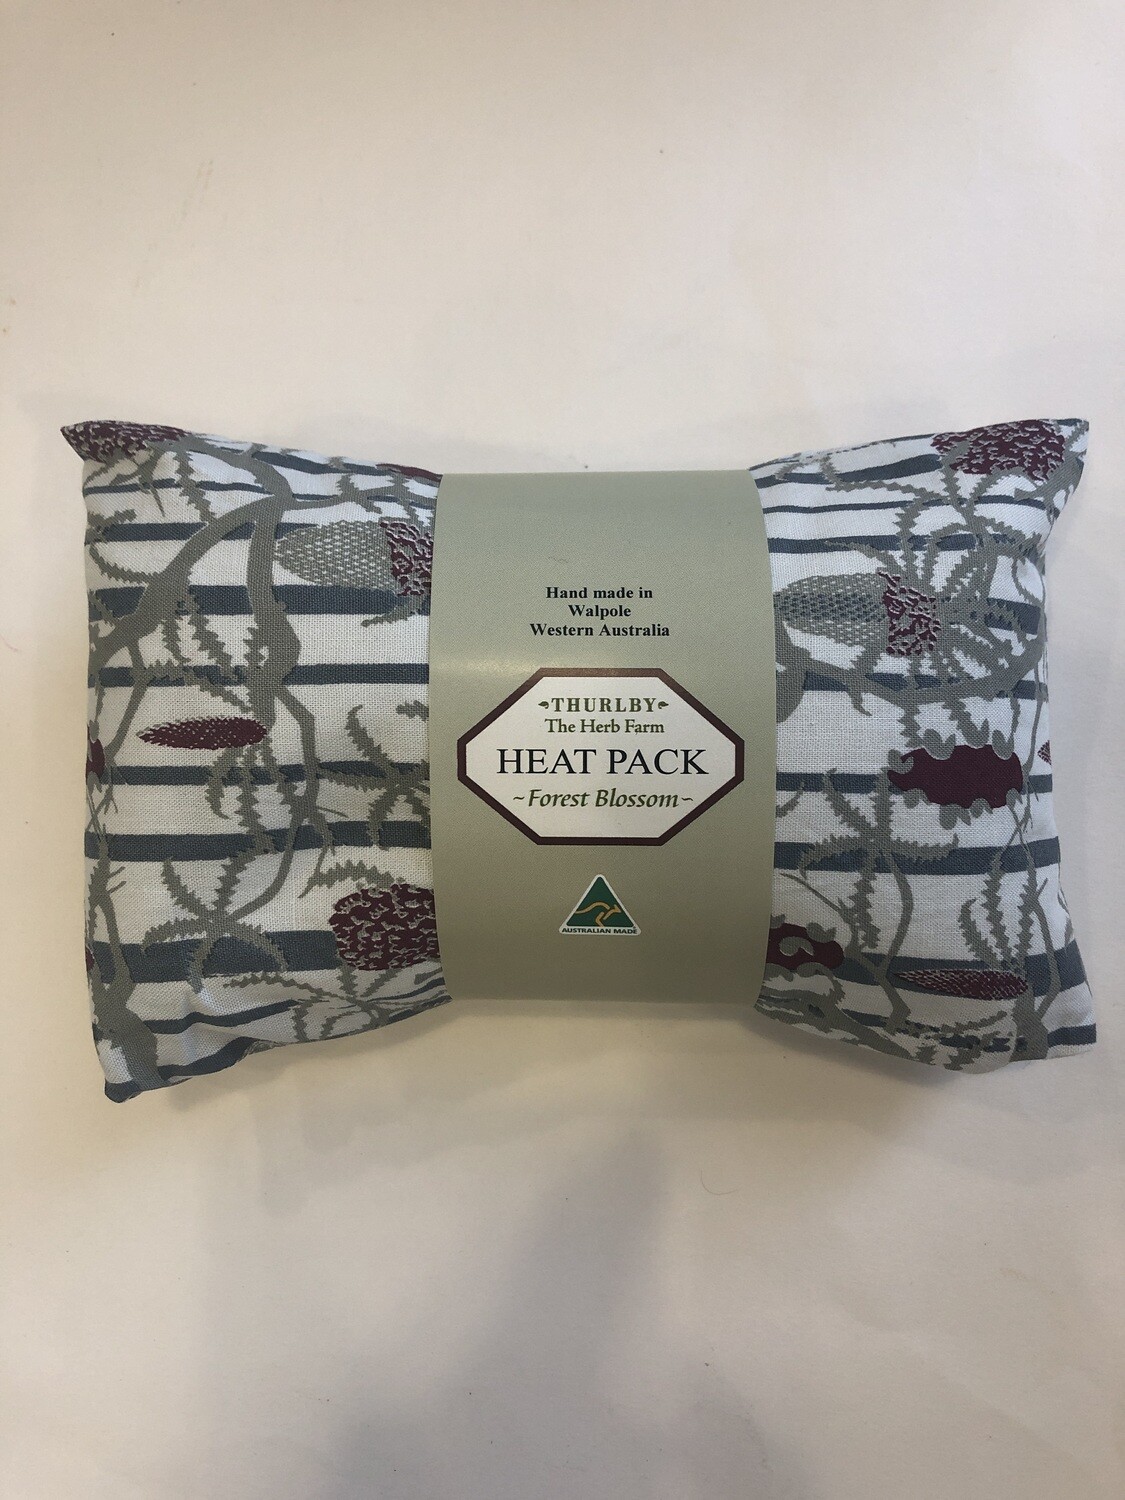 THURLBY HERB FARM-Forest Blossom Heat Pack - Red